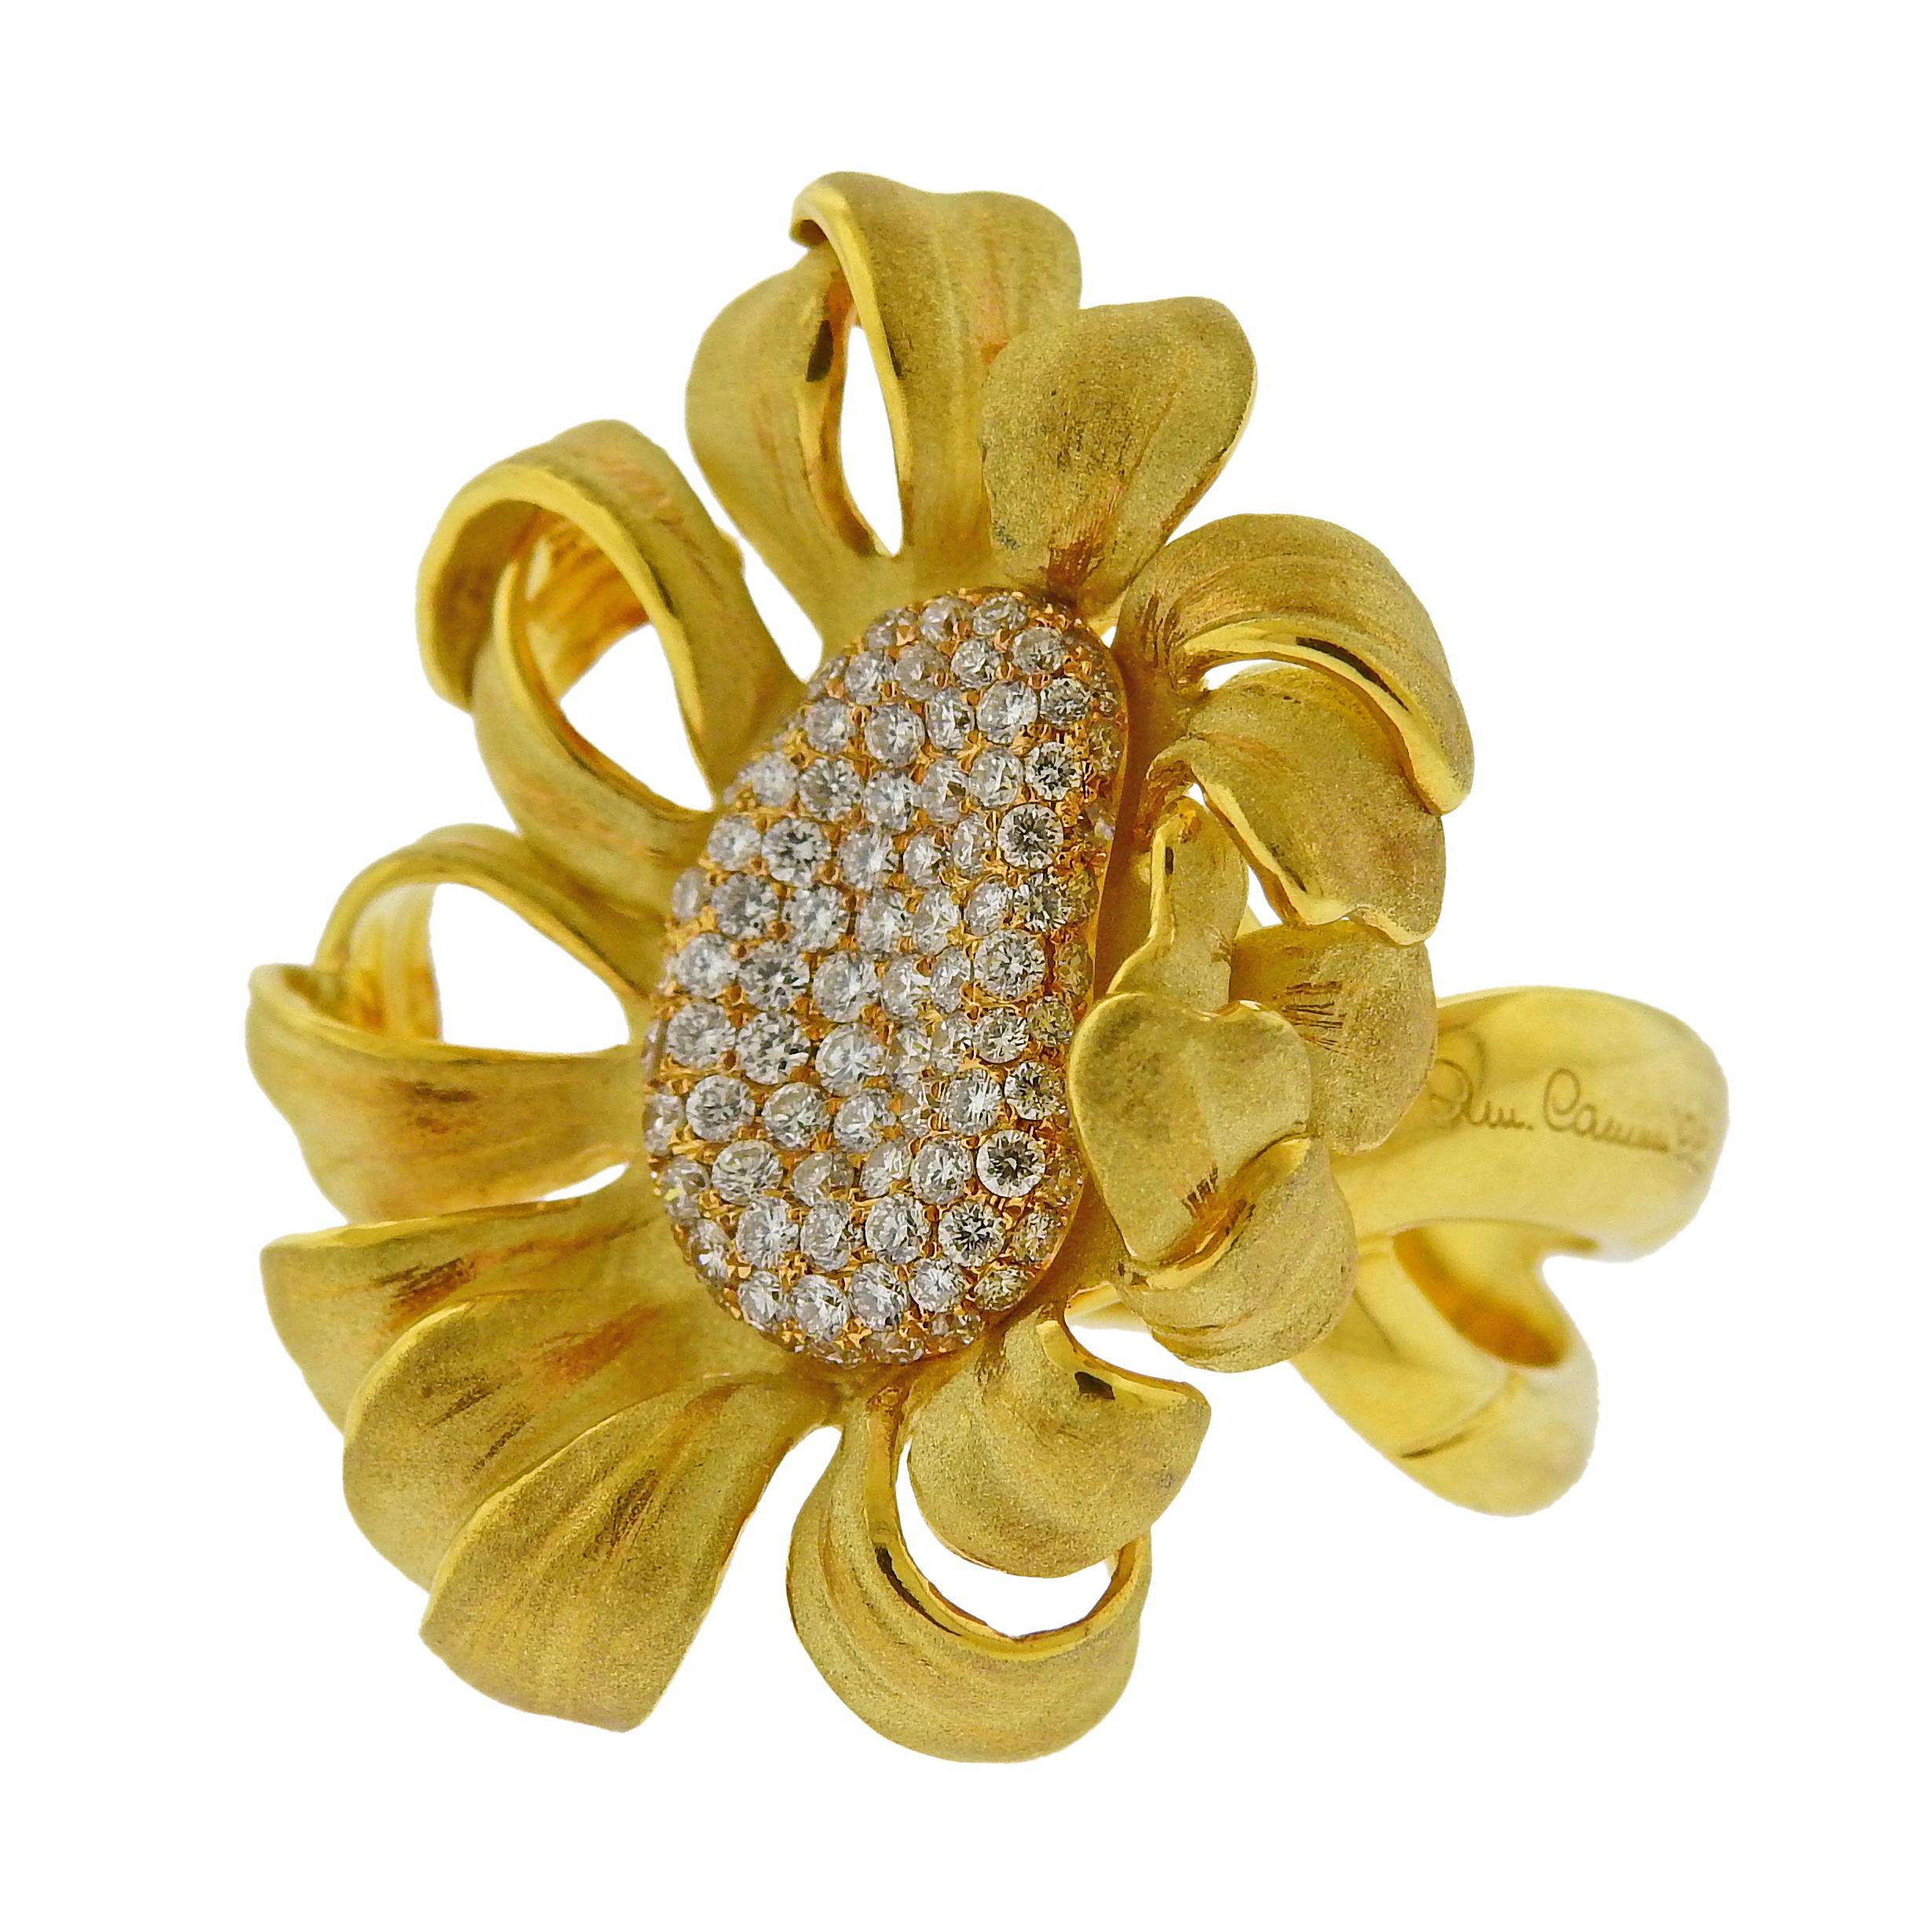 Pair of brand new 18k yellow gold Mirage large flower ring, by Italian designer Annamria Cammilli, set with 0.92ctw in GH/VS diamonds. Comes with box and COA, retail $9410. Ring size - 7.5, ring top - 31mm x 26mm. Weight is 17 grams. Marked: 750,